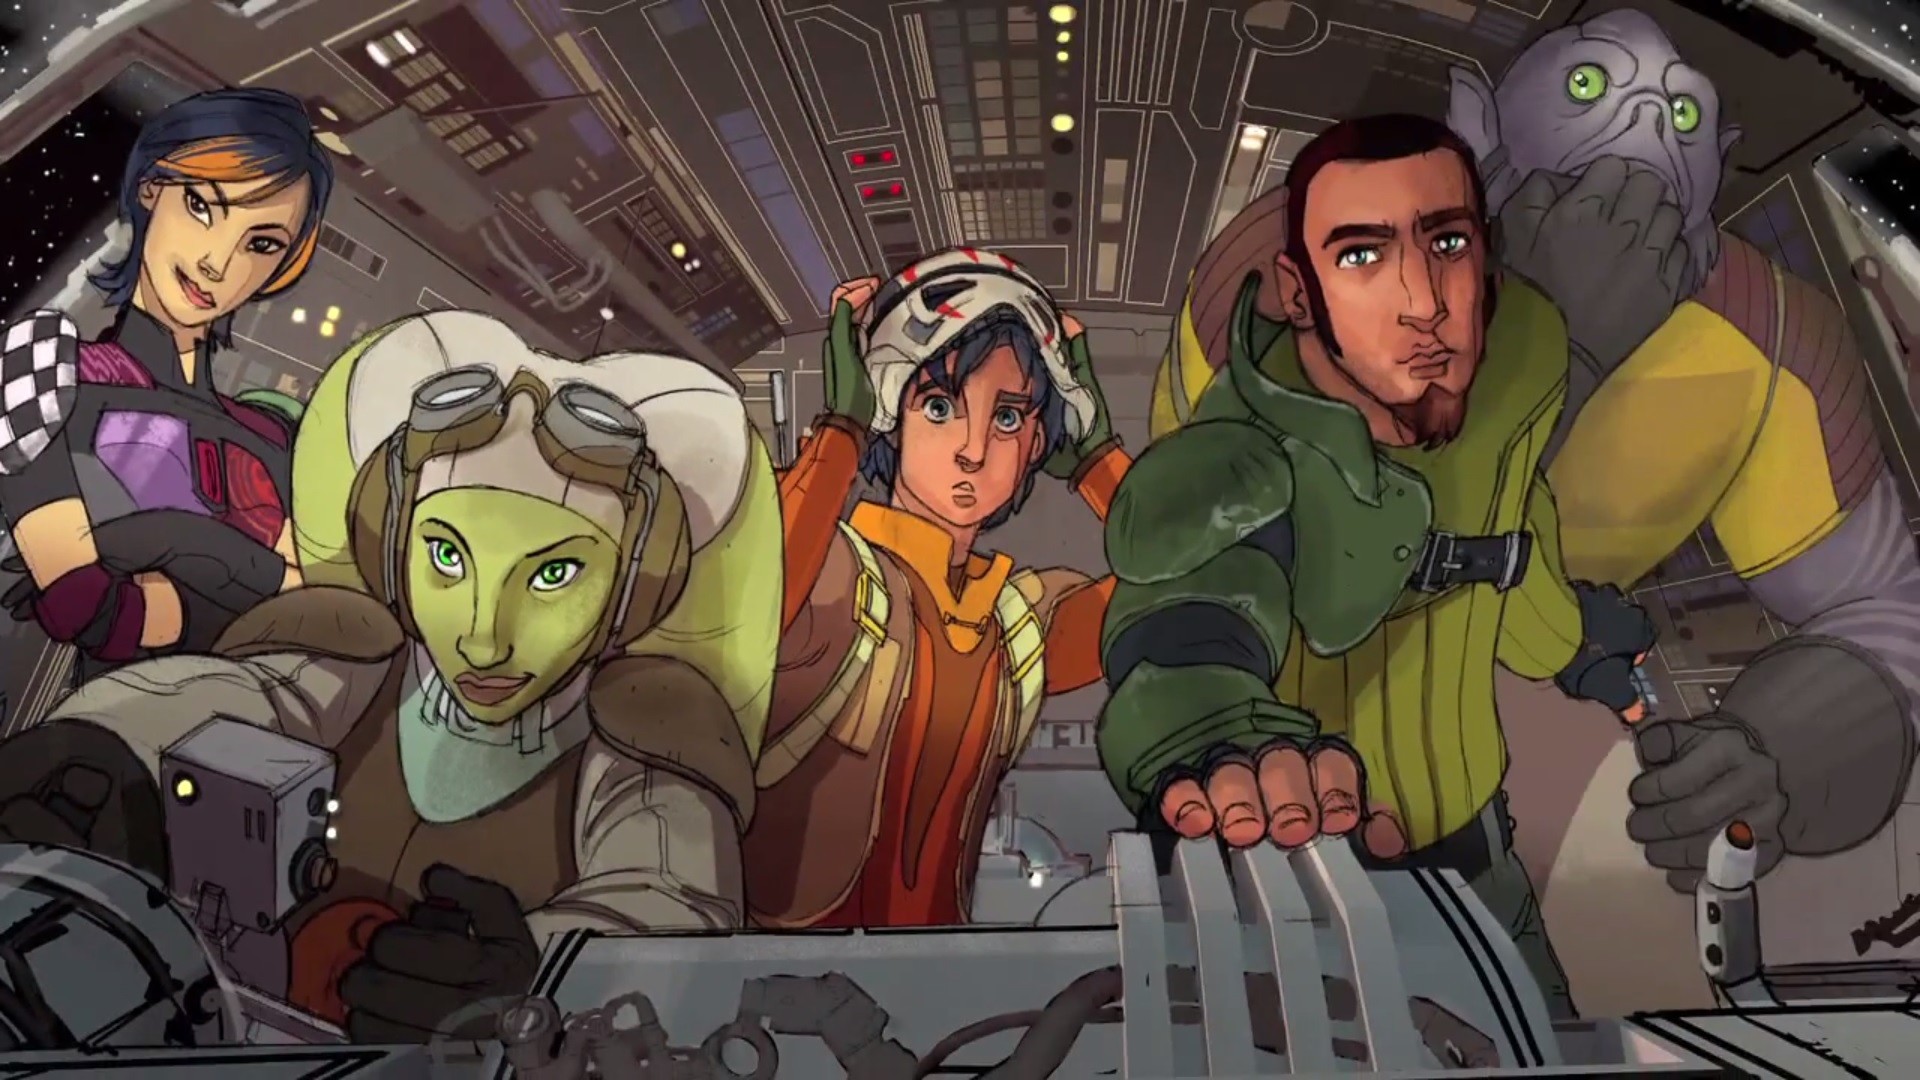 1920x1080 Concept art showing the all-new heroes of Star Wars: Rebels